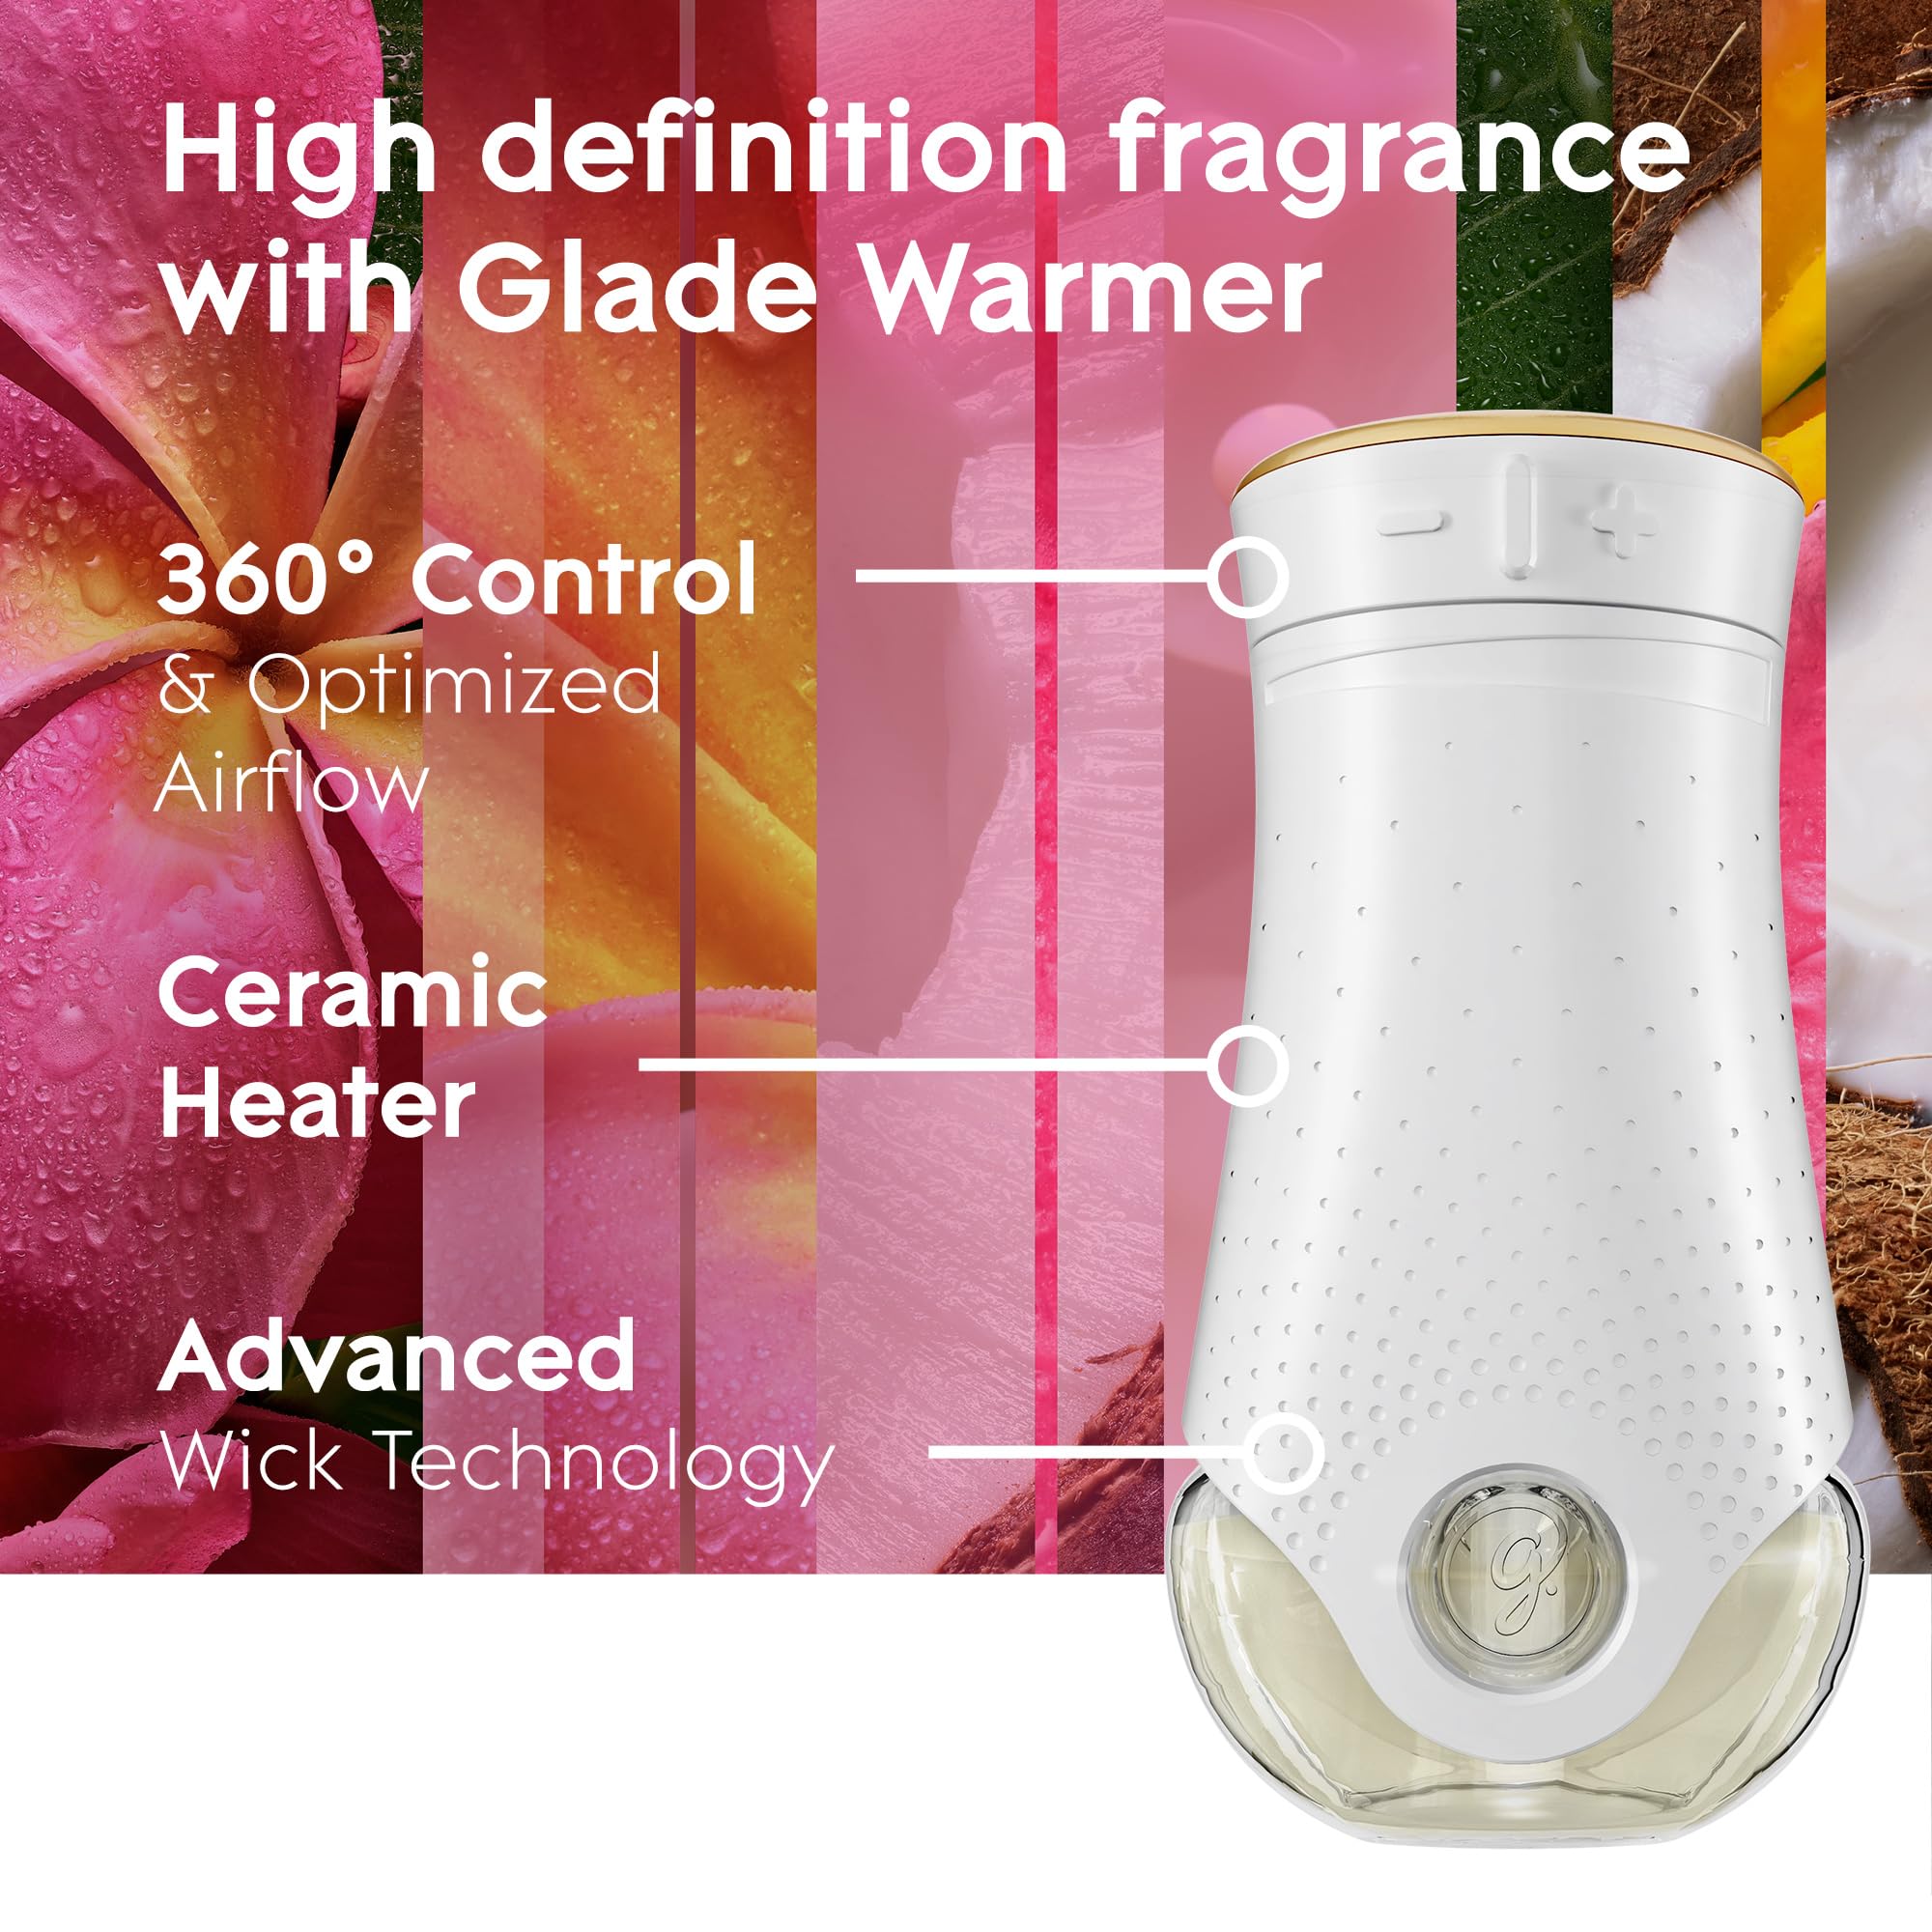 Glade PlugIns Refills Air Freshener Starter Kit, Scented and Essential Oils for Home and Bathroom, Tropical Blossoms, 4.02 Fl Oz, 2 Warmers + 6 Refills